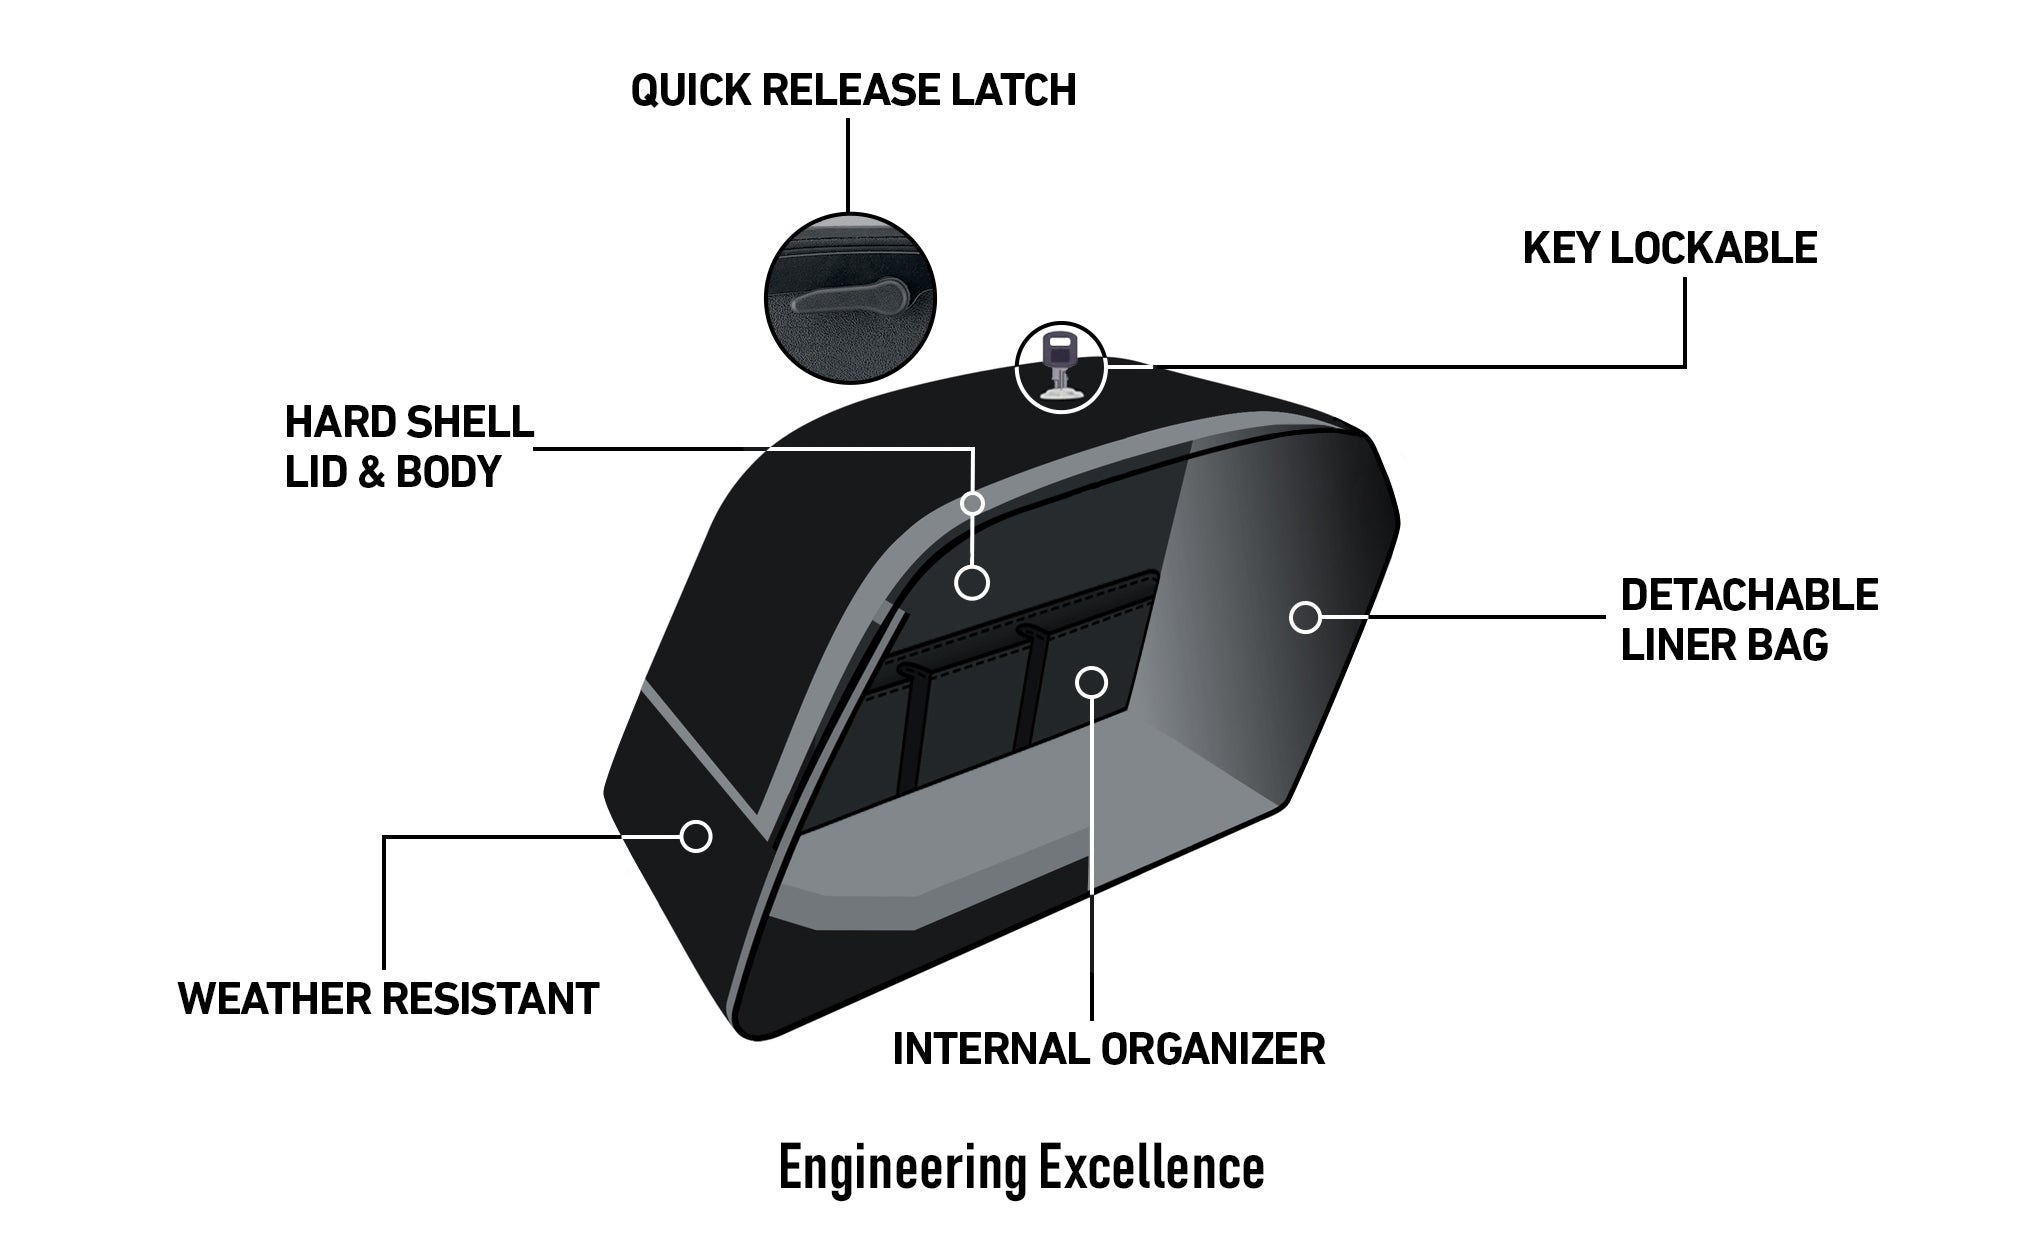 Viking Baldur Extra Large Matte Motorcycle Hard Saddlebags For Harley Softail Breakout Fxsb Engineering Excellence with Bag on Bike @expand